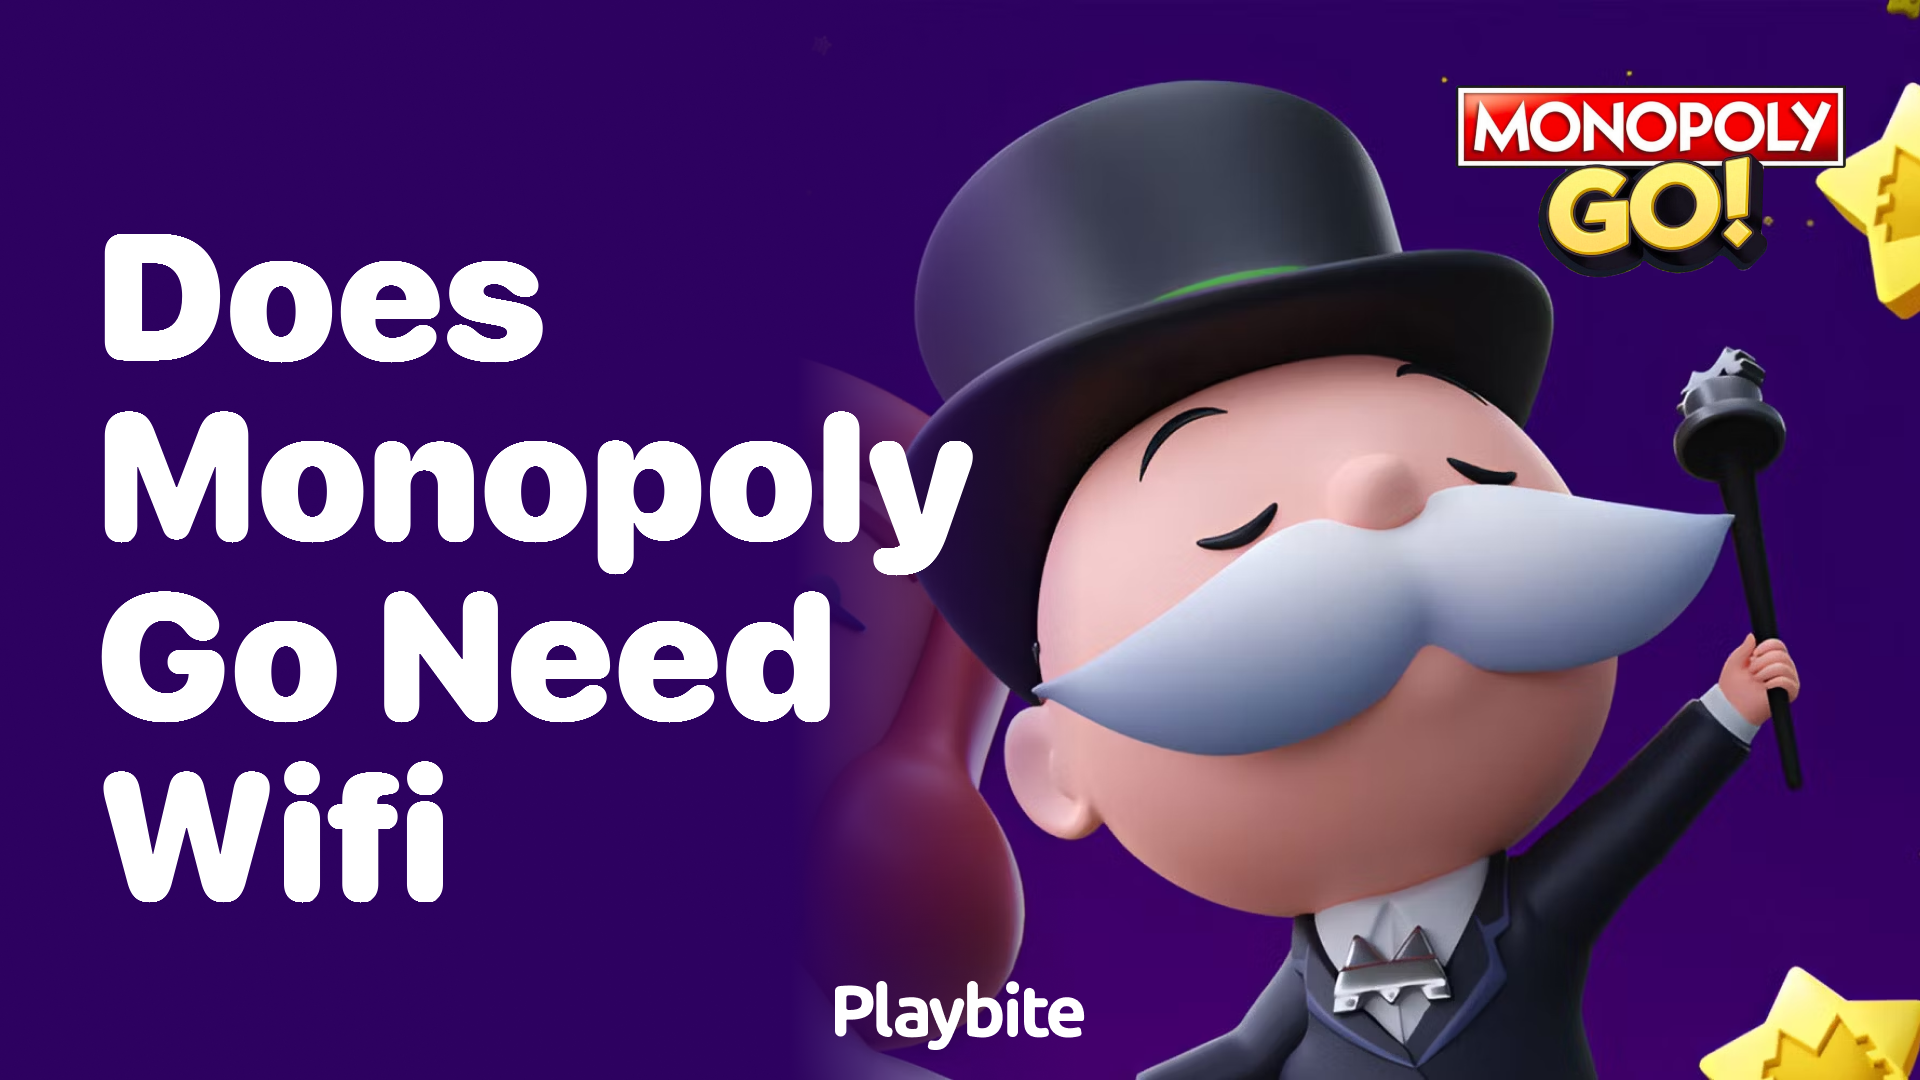 Does Monopoly Go Need WiFi to Play?